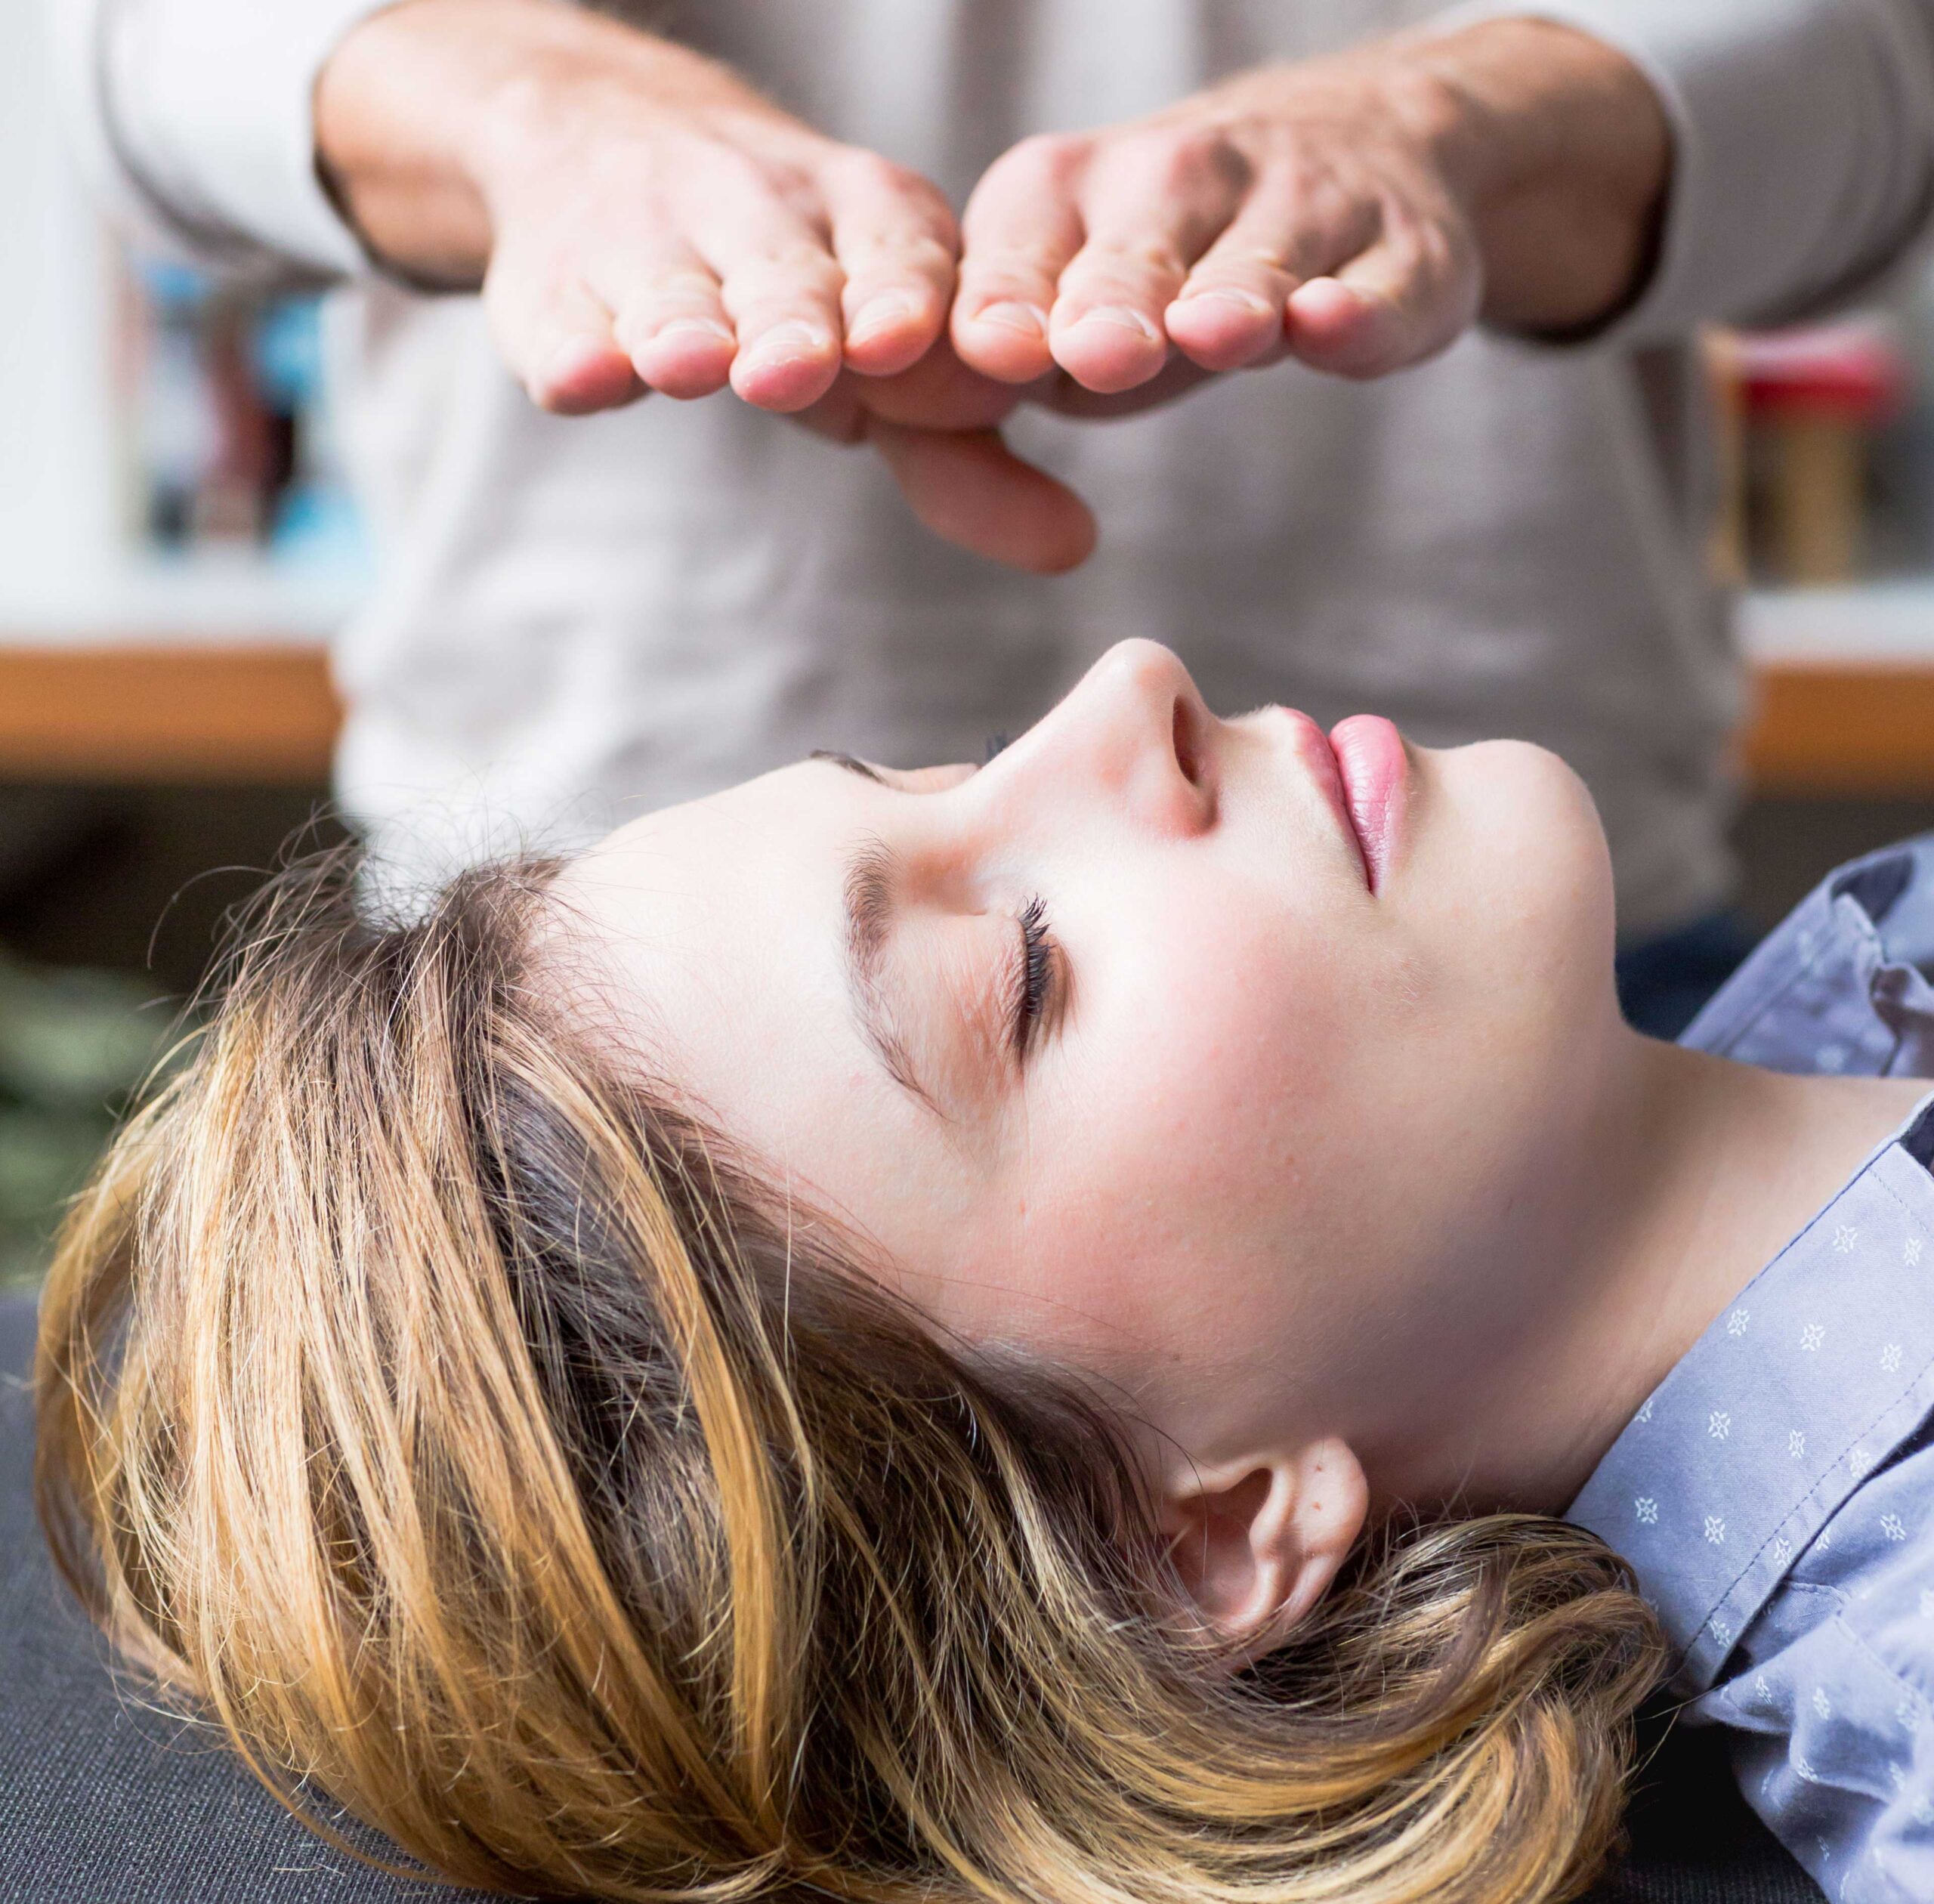 Can alternative therapy help you heal?